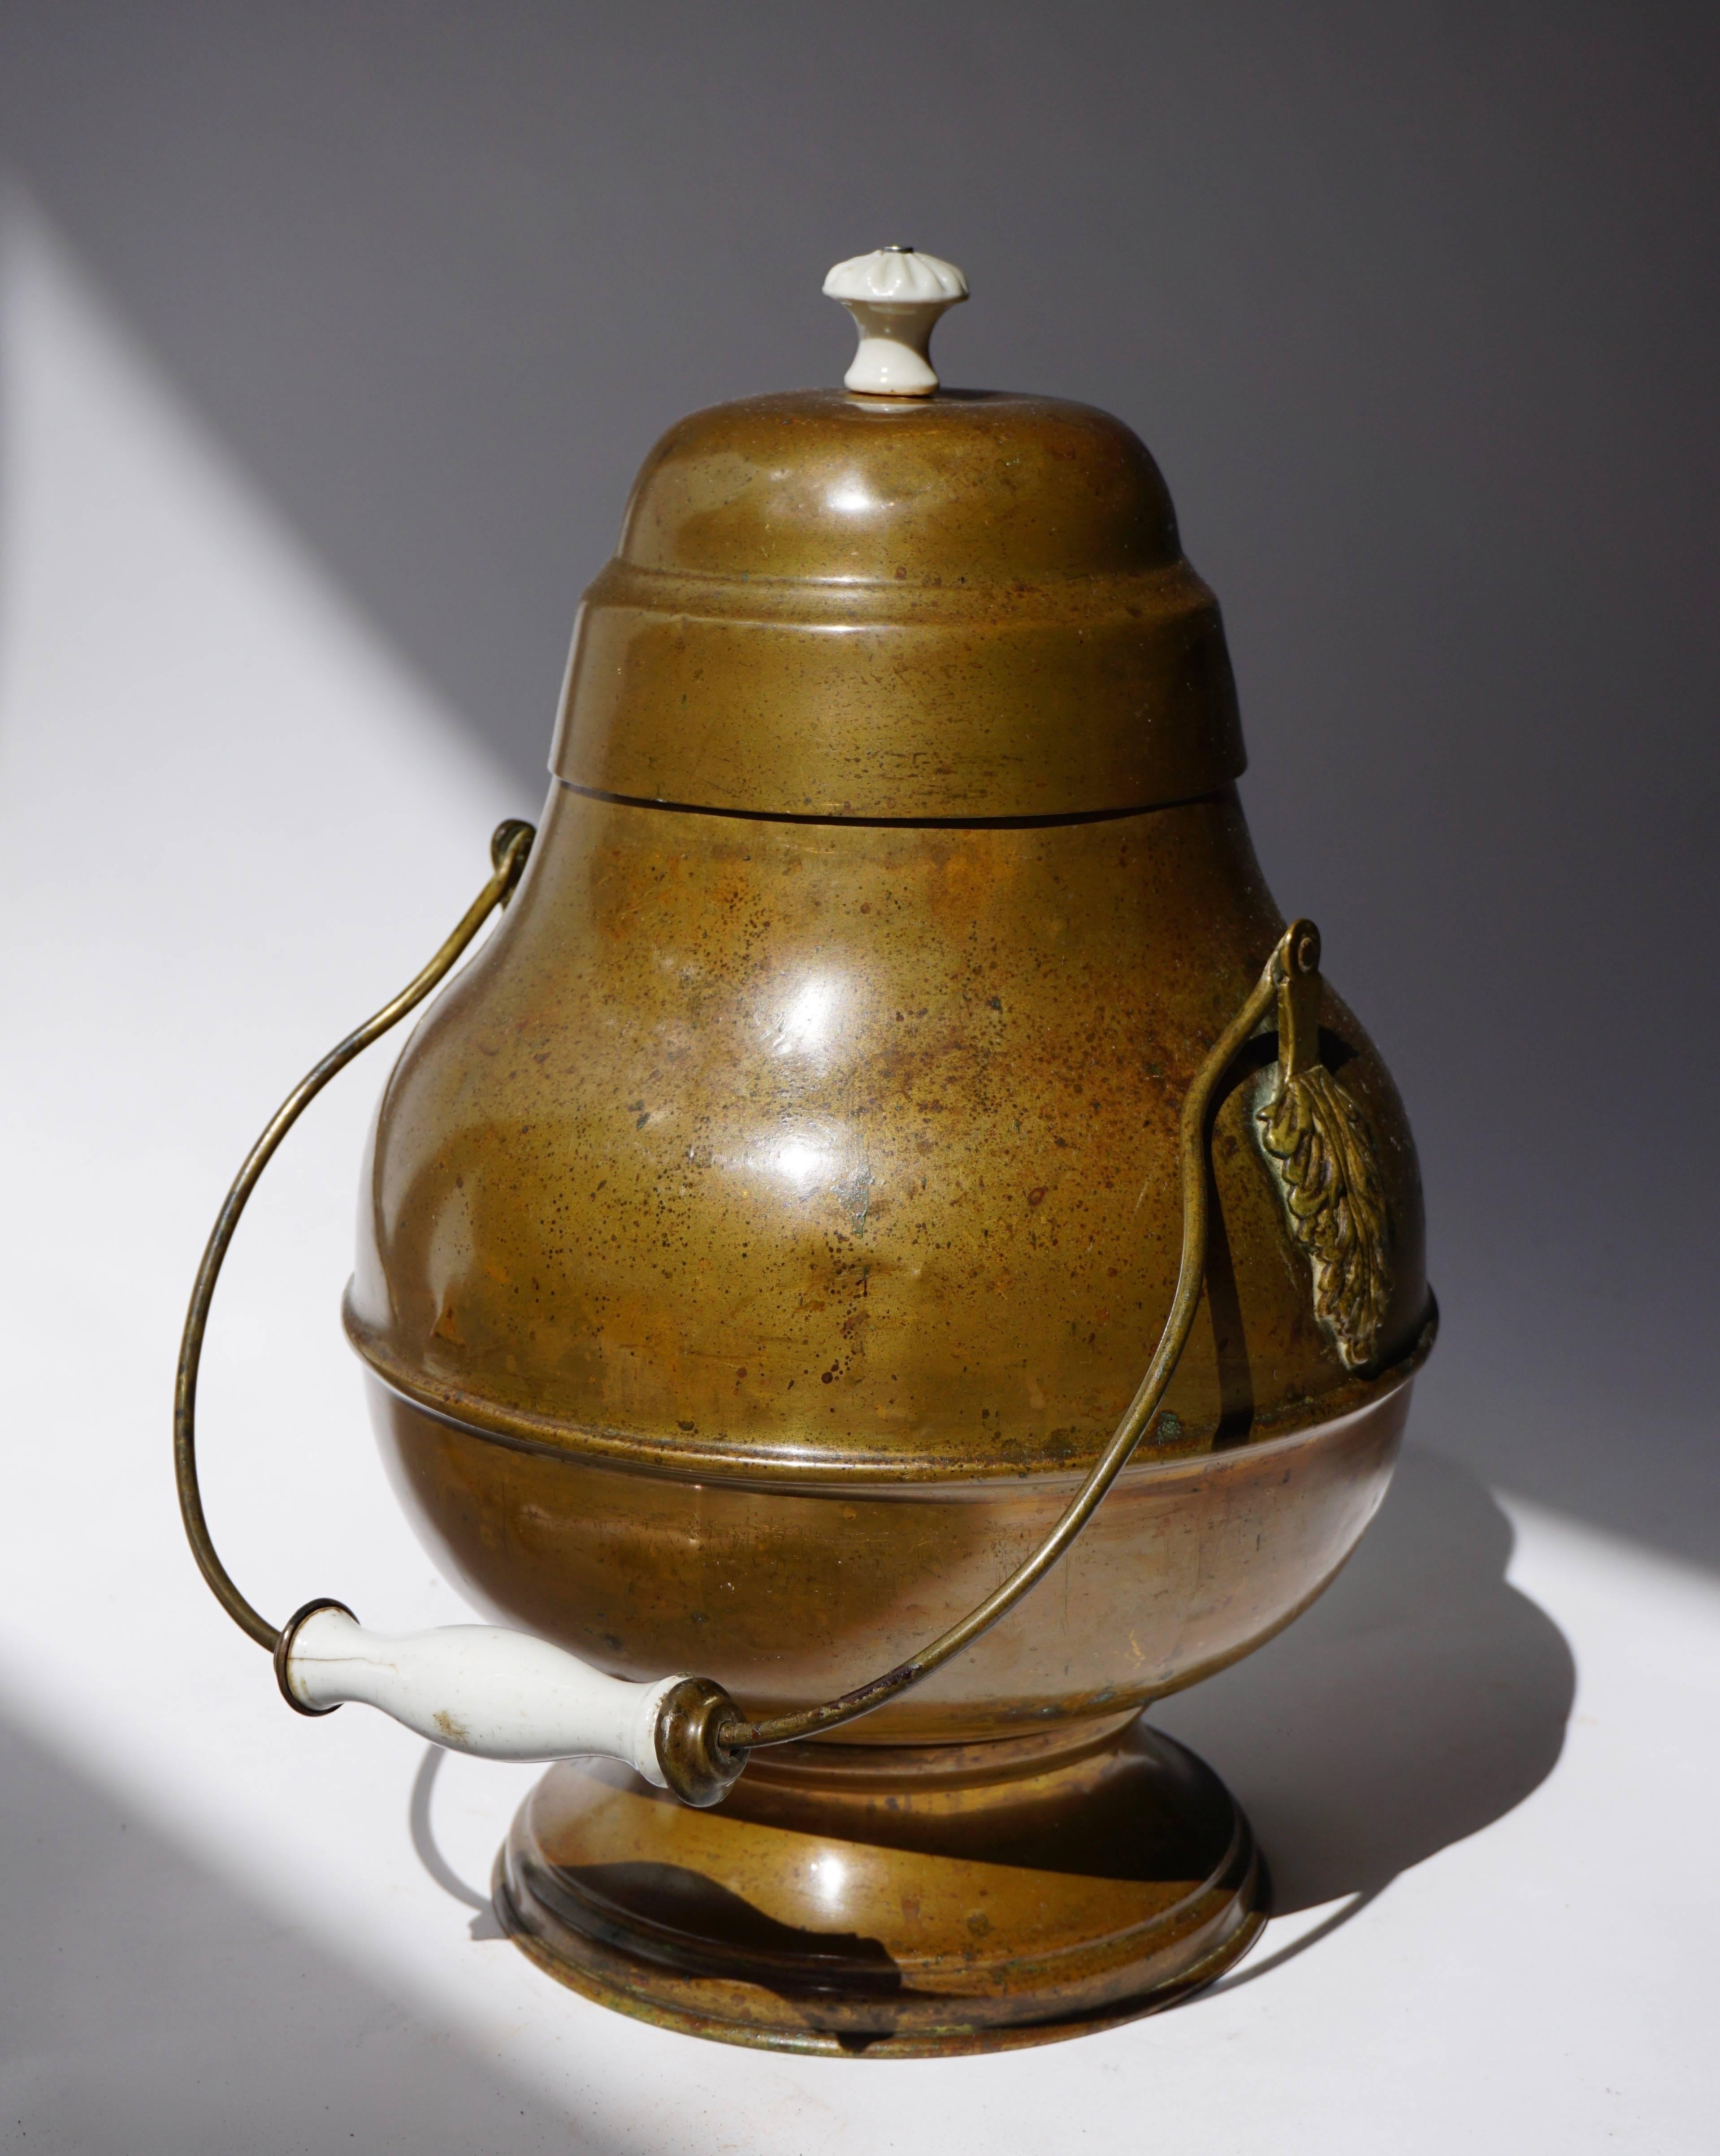 A Dutch 'doofpot' was a pot to store the not yet burned wood or other fuel. Because the jar was sealed airtight, the burning would soon stop due to lack of oxygen. The remaining residual fuel could be reused. Burning wood in a 'doofpot' becomes for